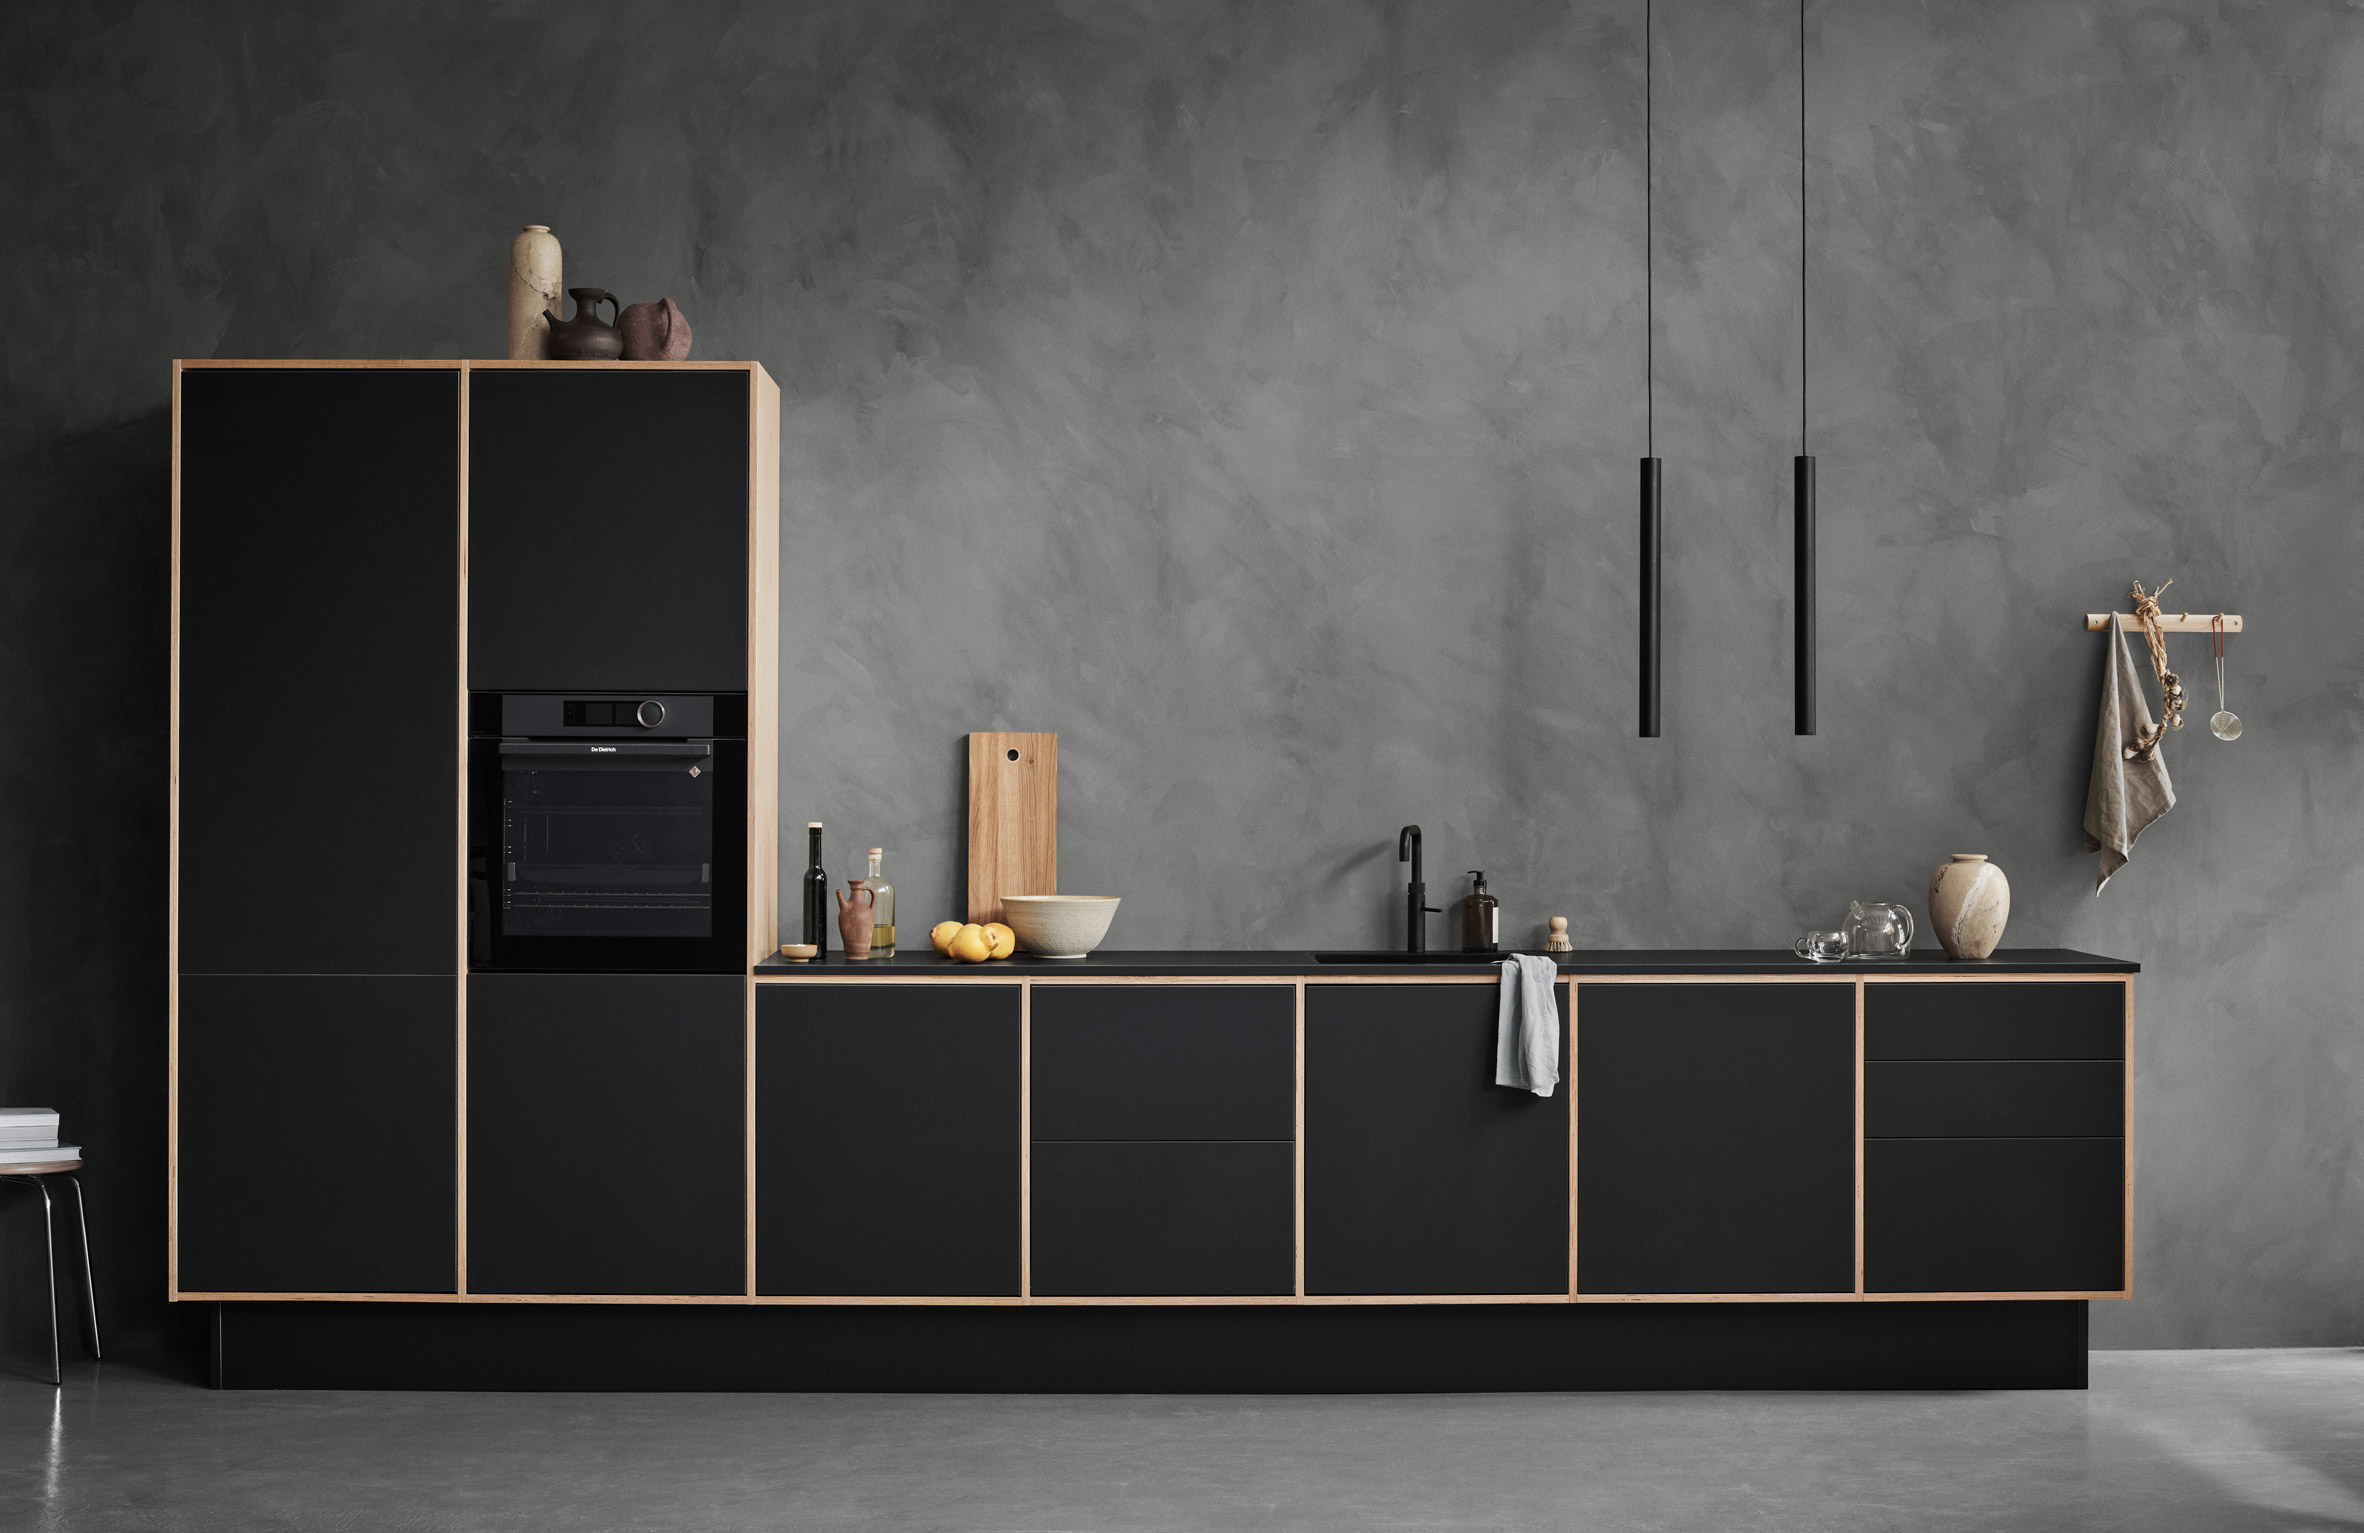 Birch and black LoopKitchen by Stykka in a concrete room